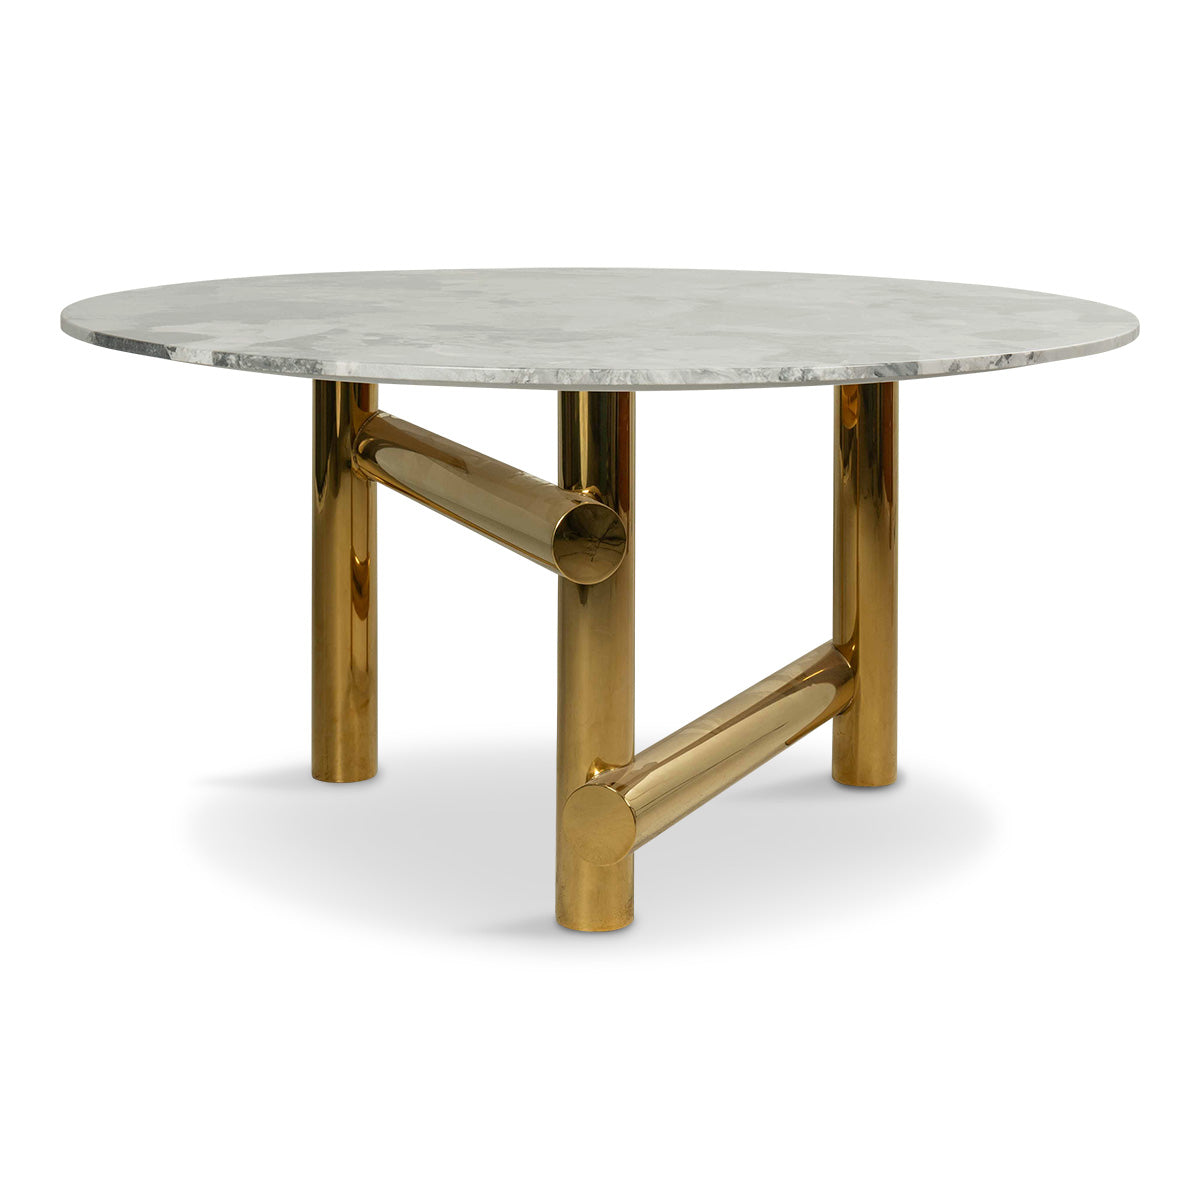 St Pierre Round Dining Table with Grey Marble Top